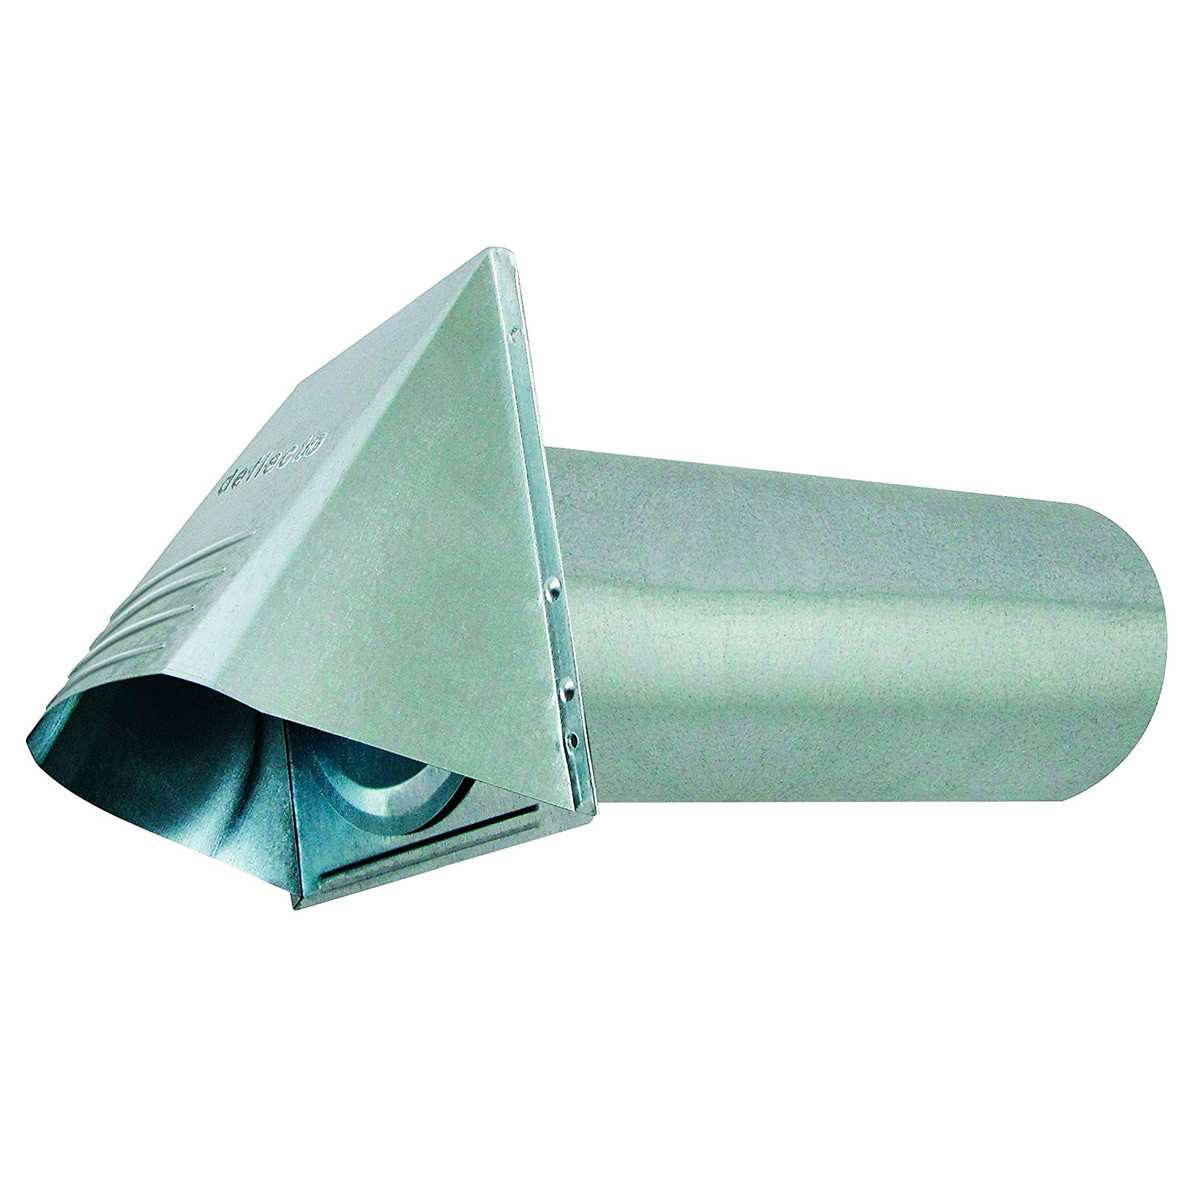 Bathroom Exhaust Roof Vent
 Venting Exhaust Fans Through the Roof